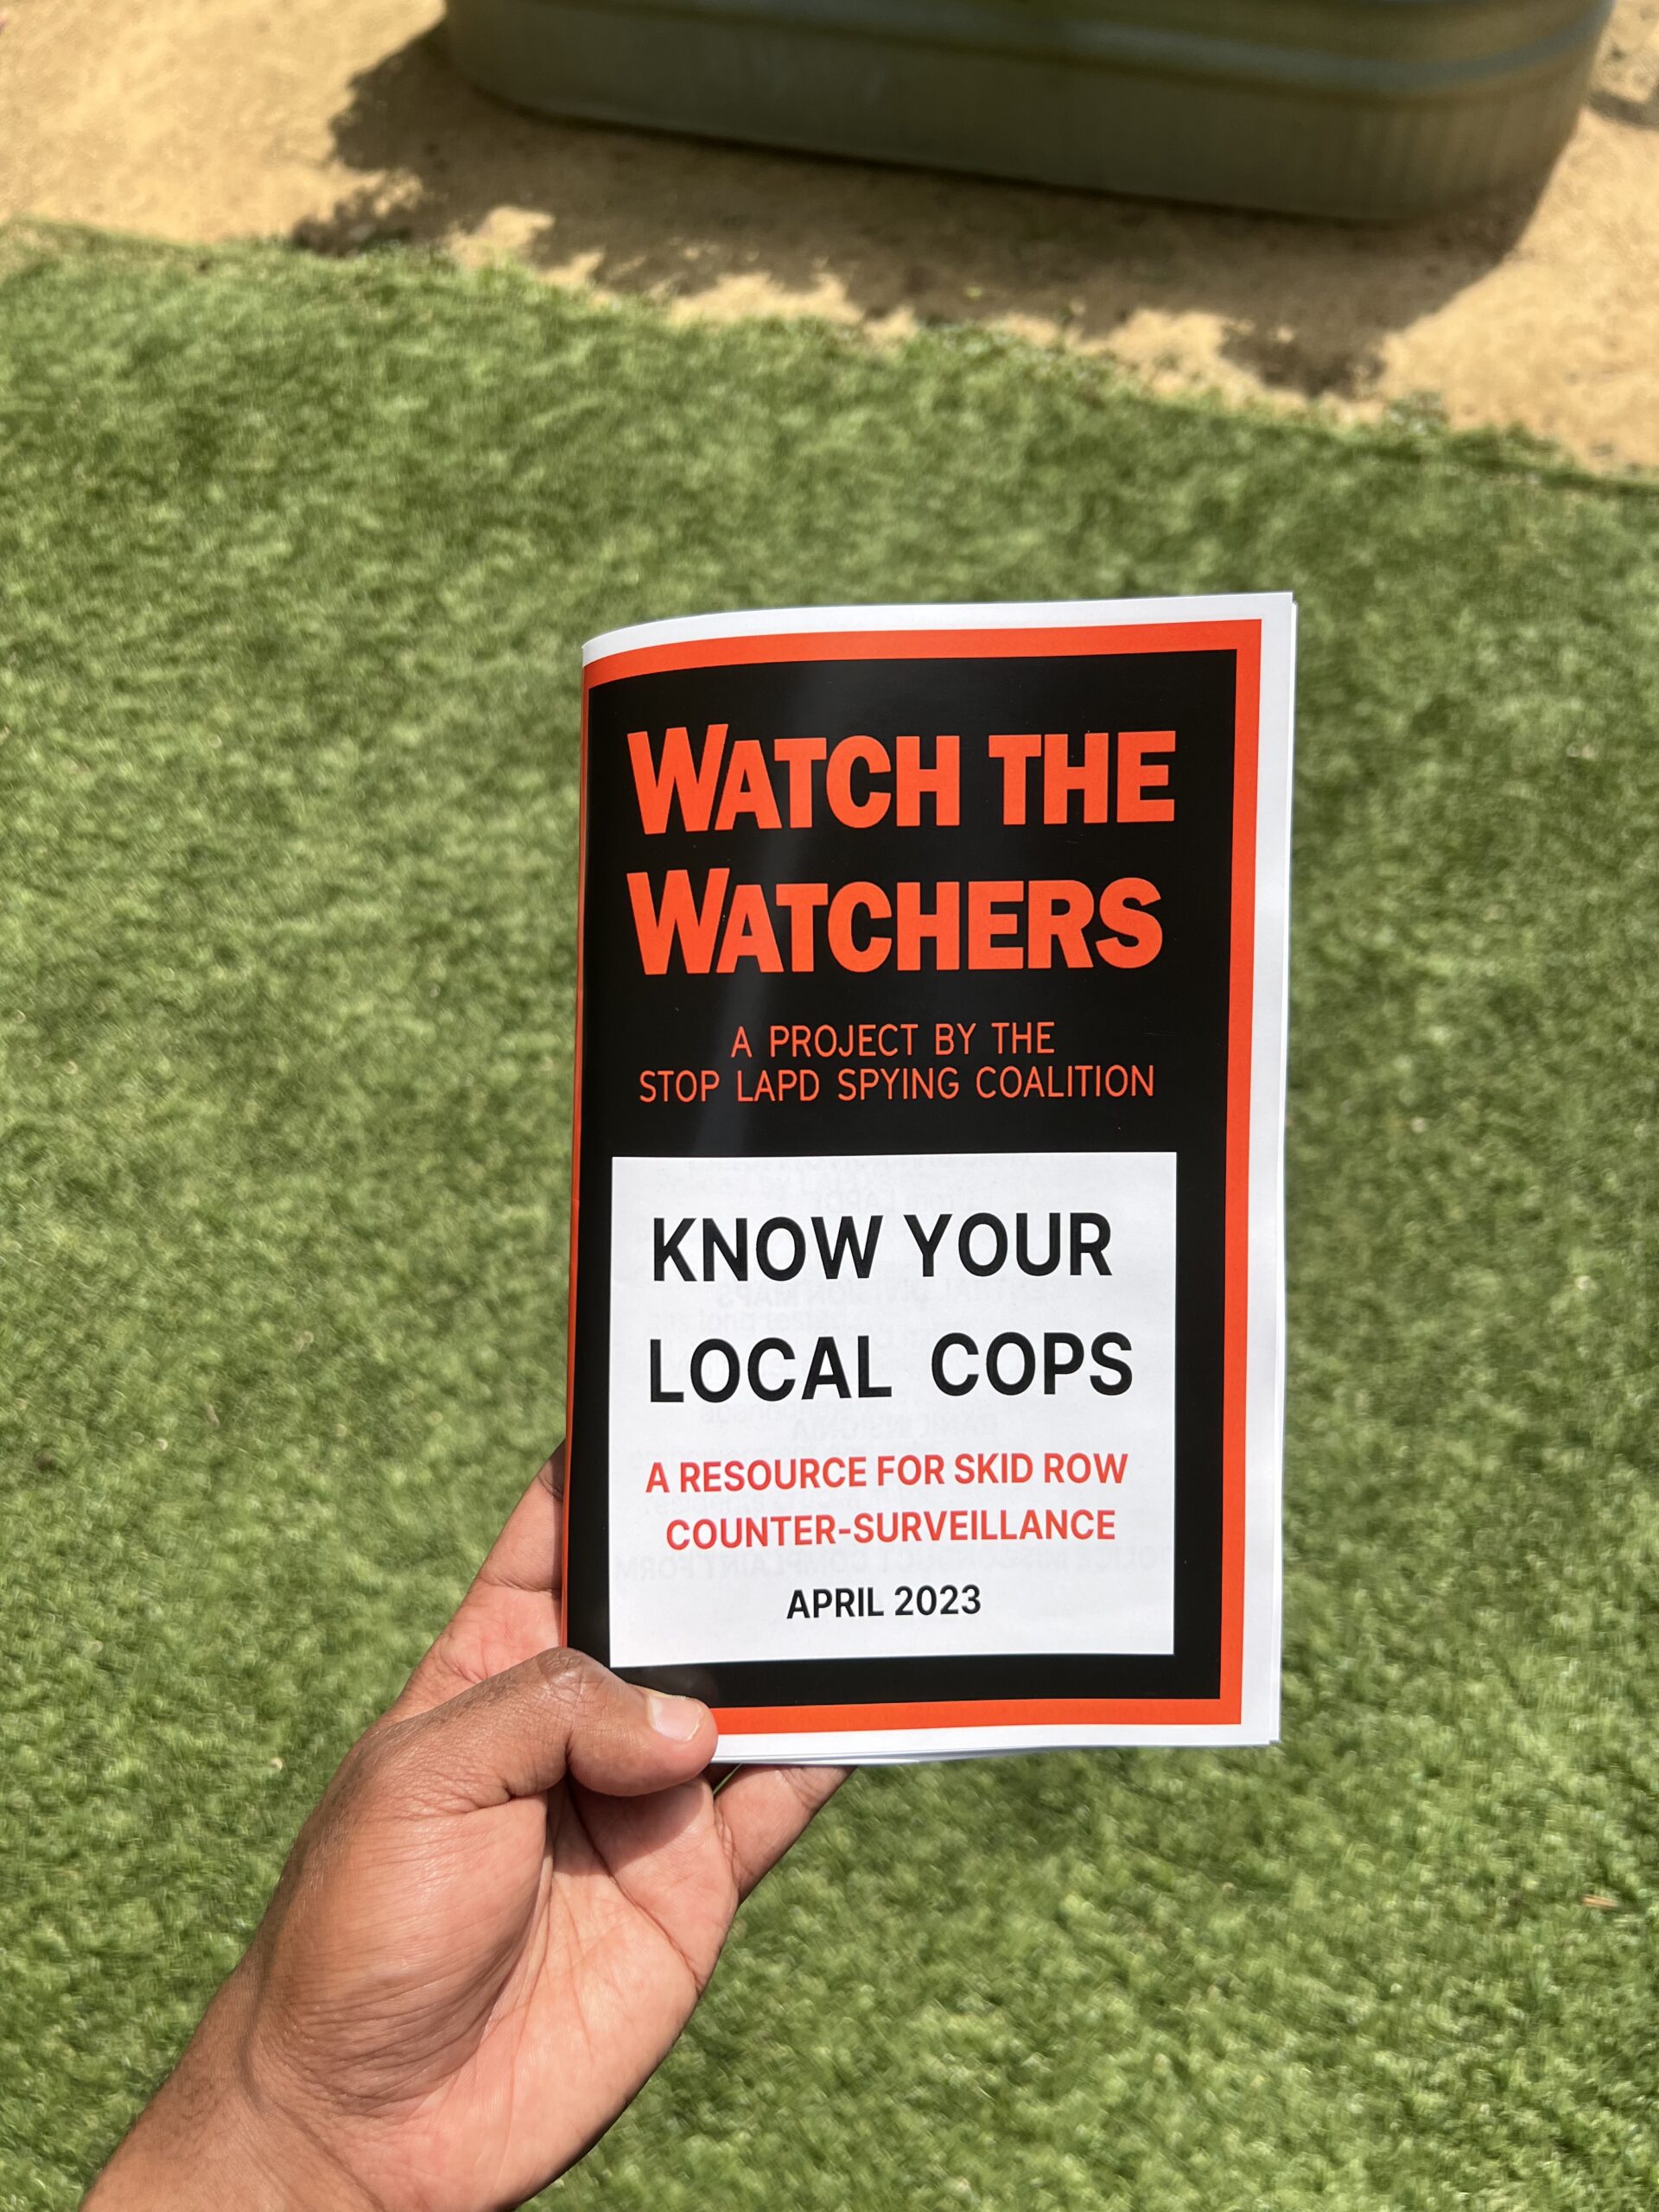 Know Your Local Cops: A Resource for Skid Row Counter-Surveillance